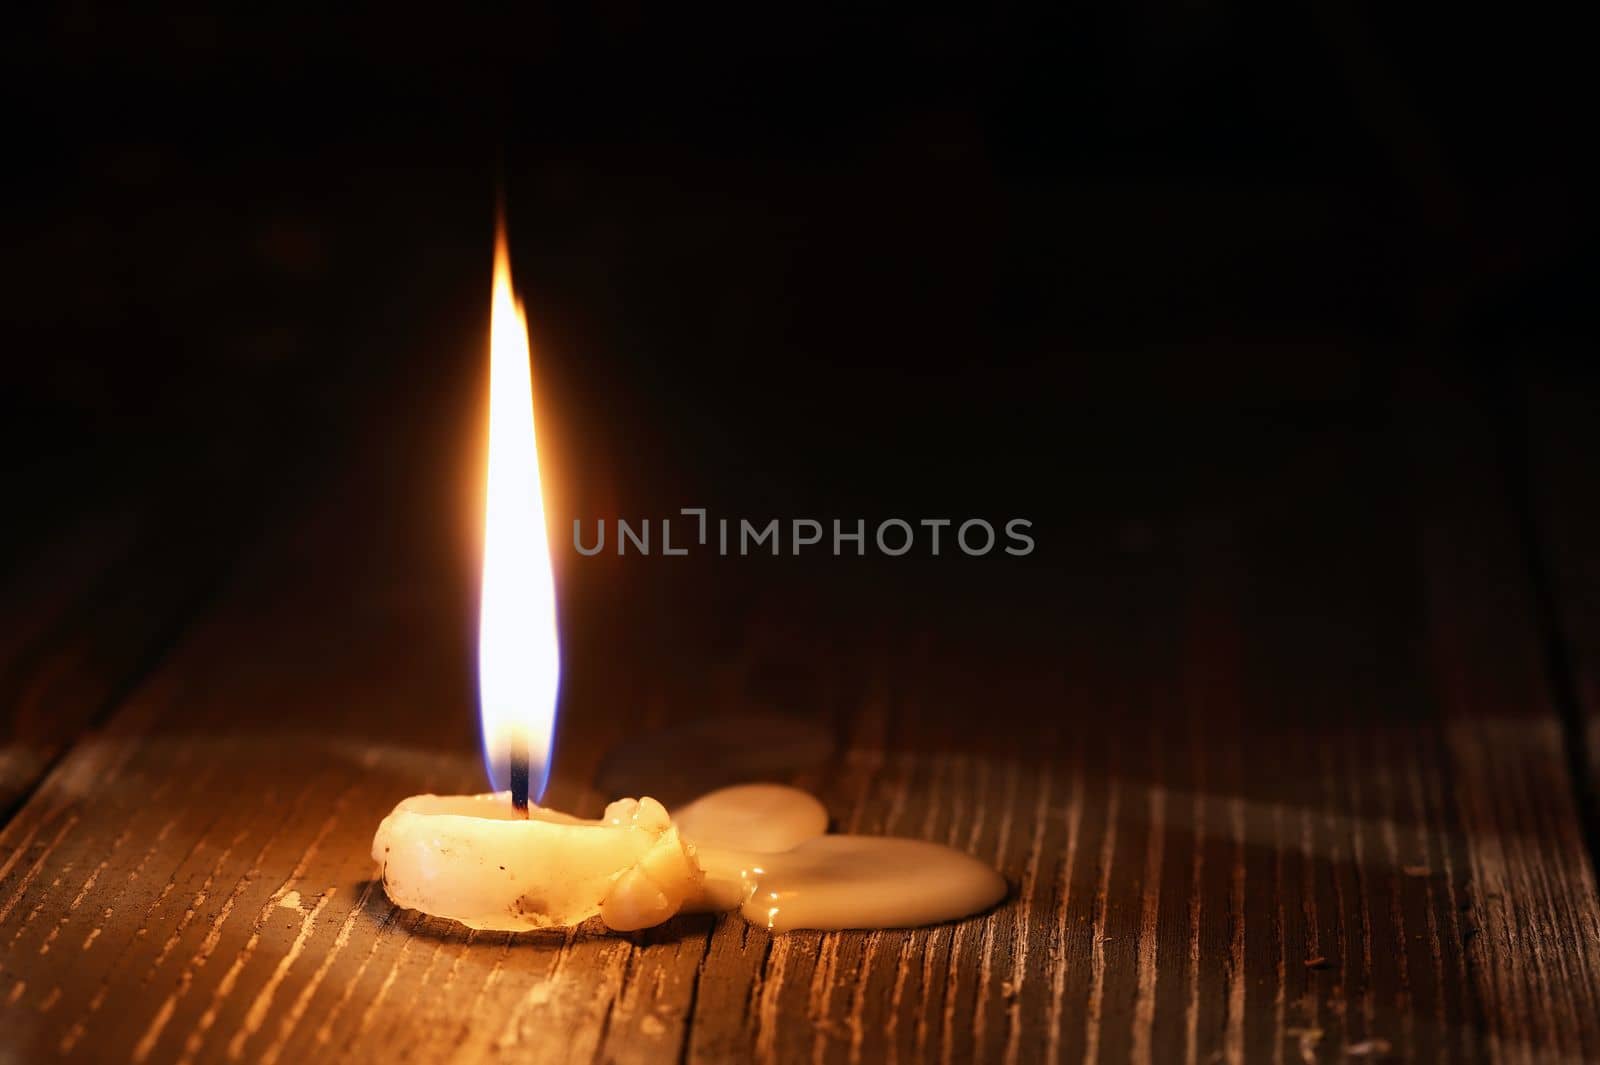 Alone lighting candle on old wooden surface